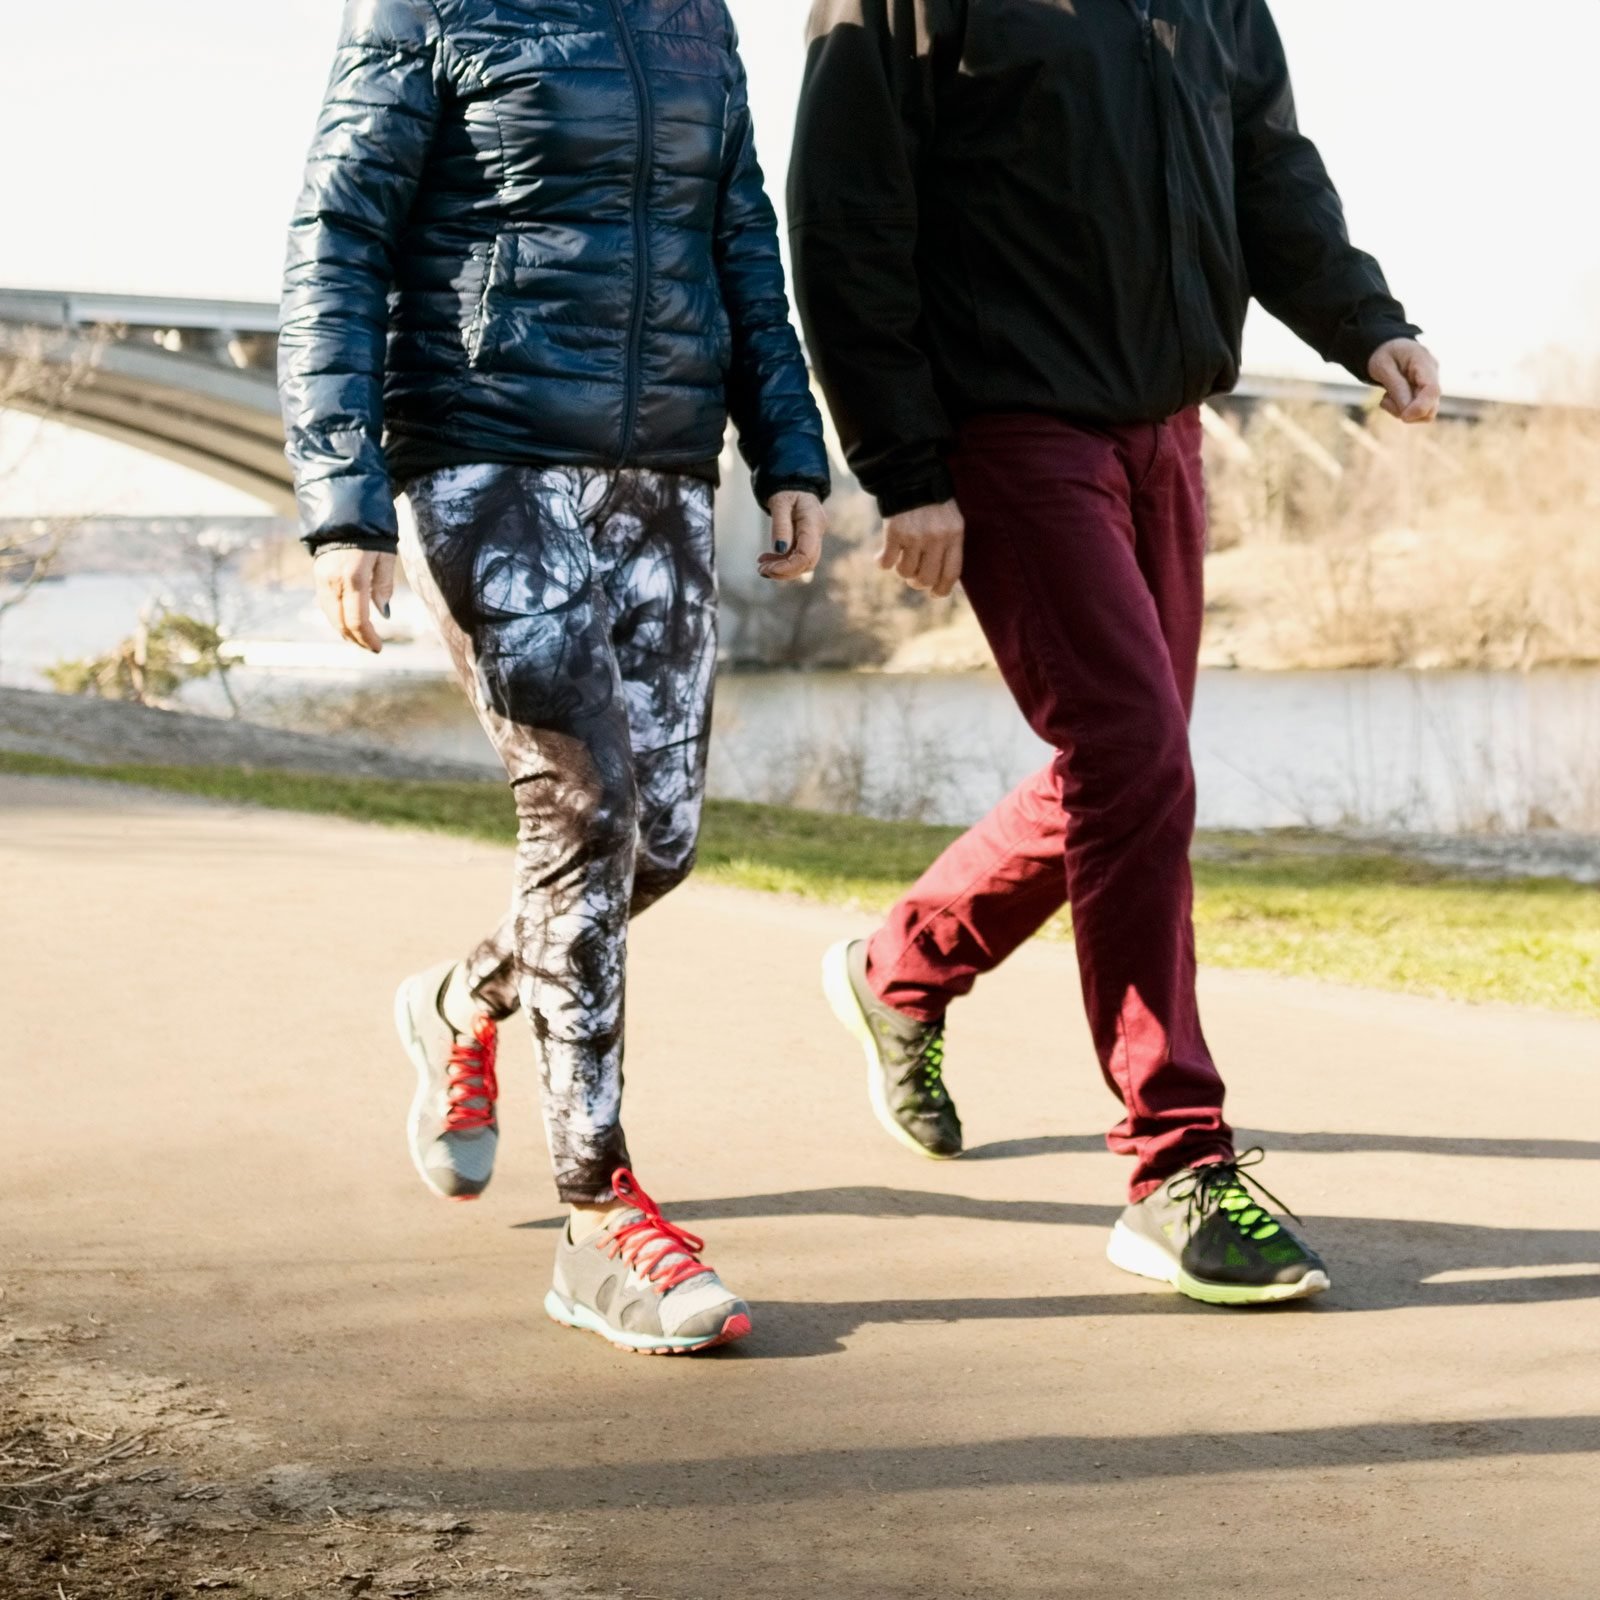 New Finding: Walking This Far Each Day Could Reduce Risk of Heart Failure